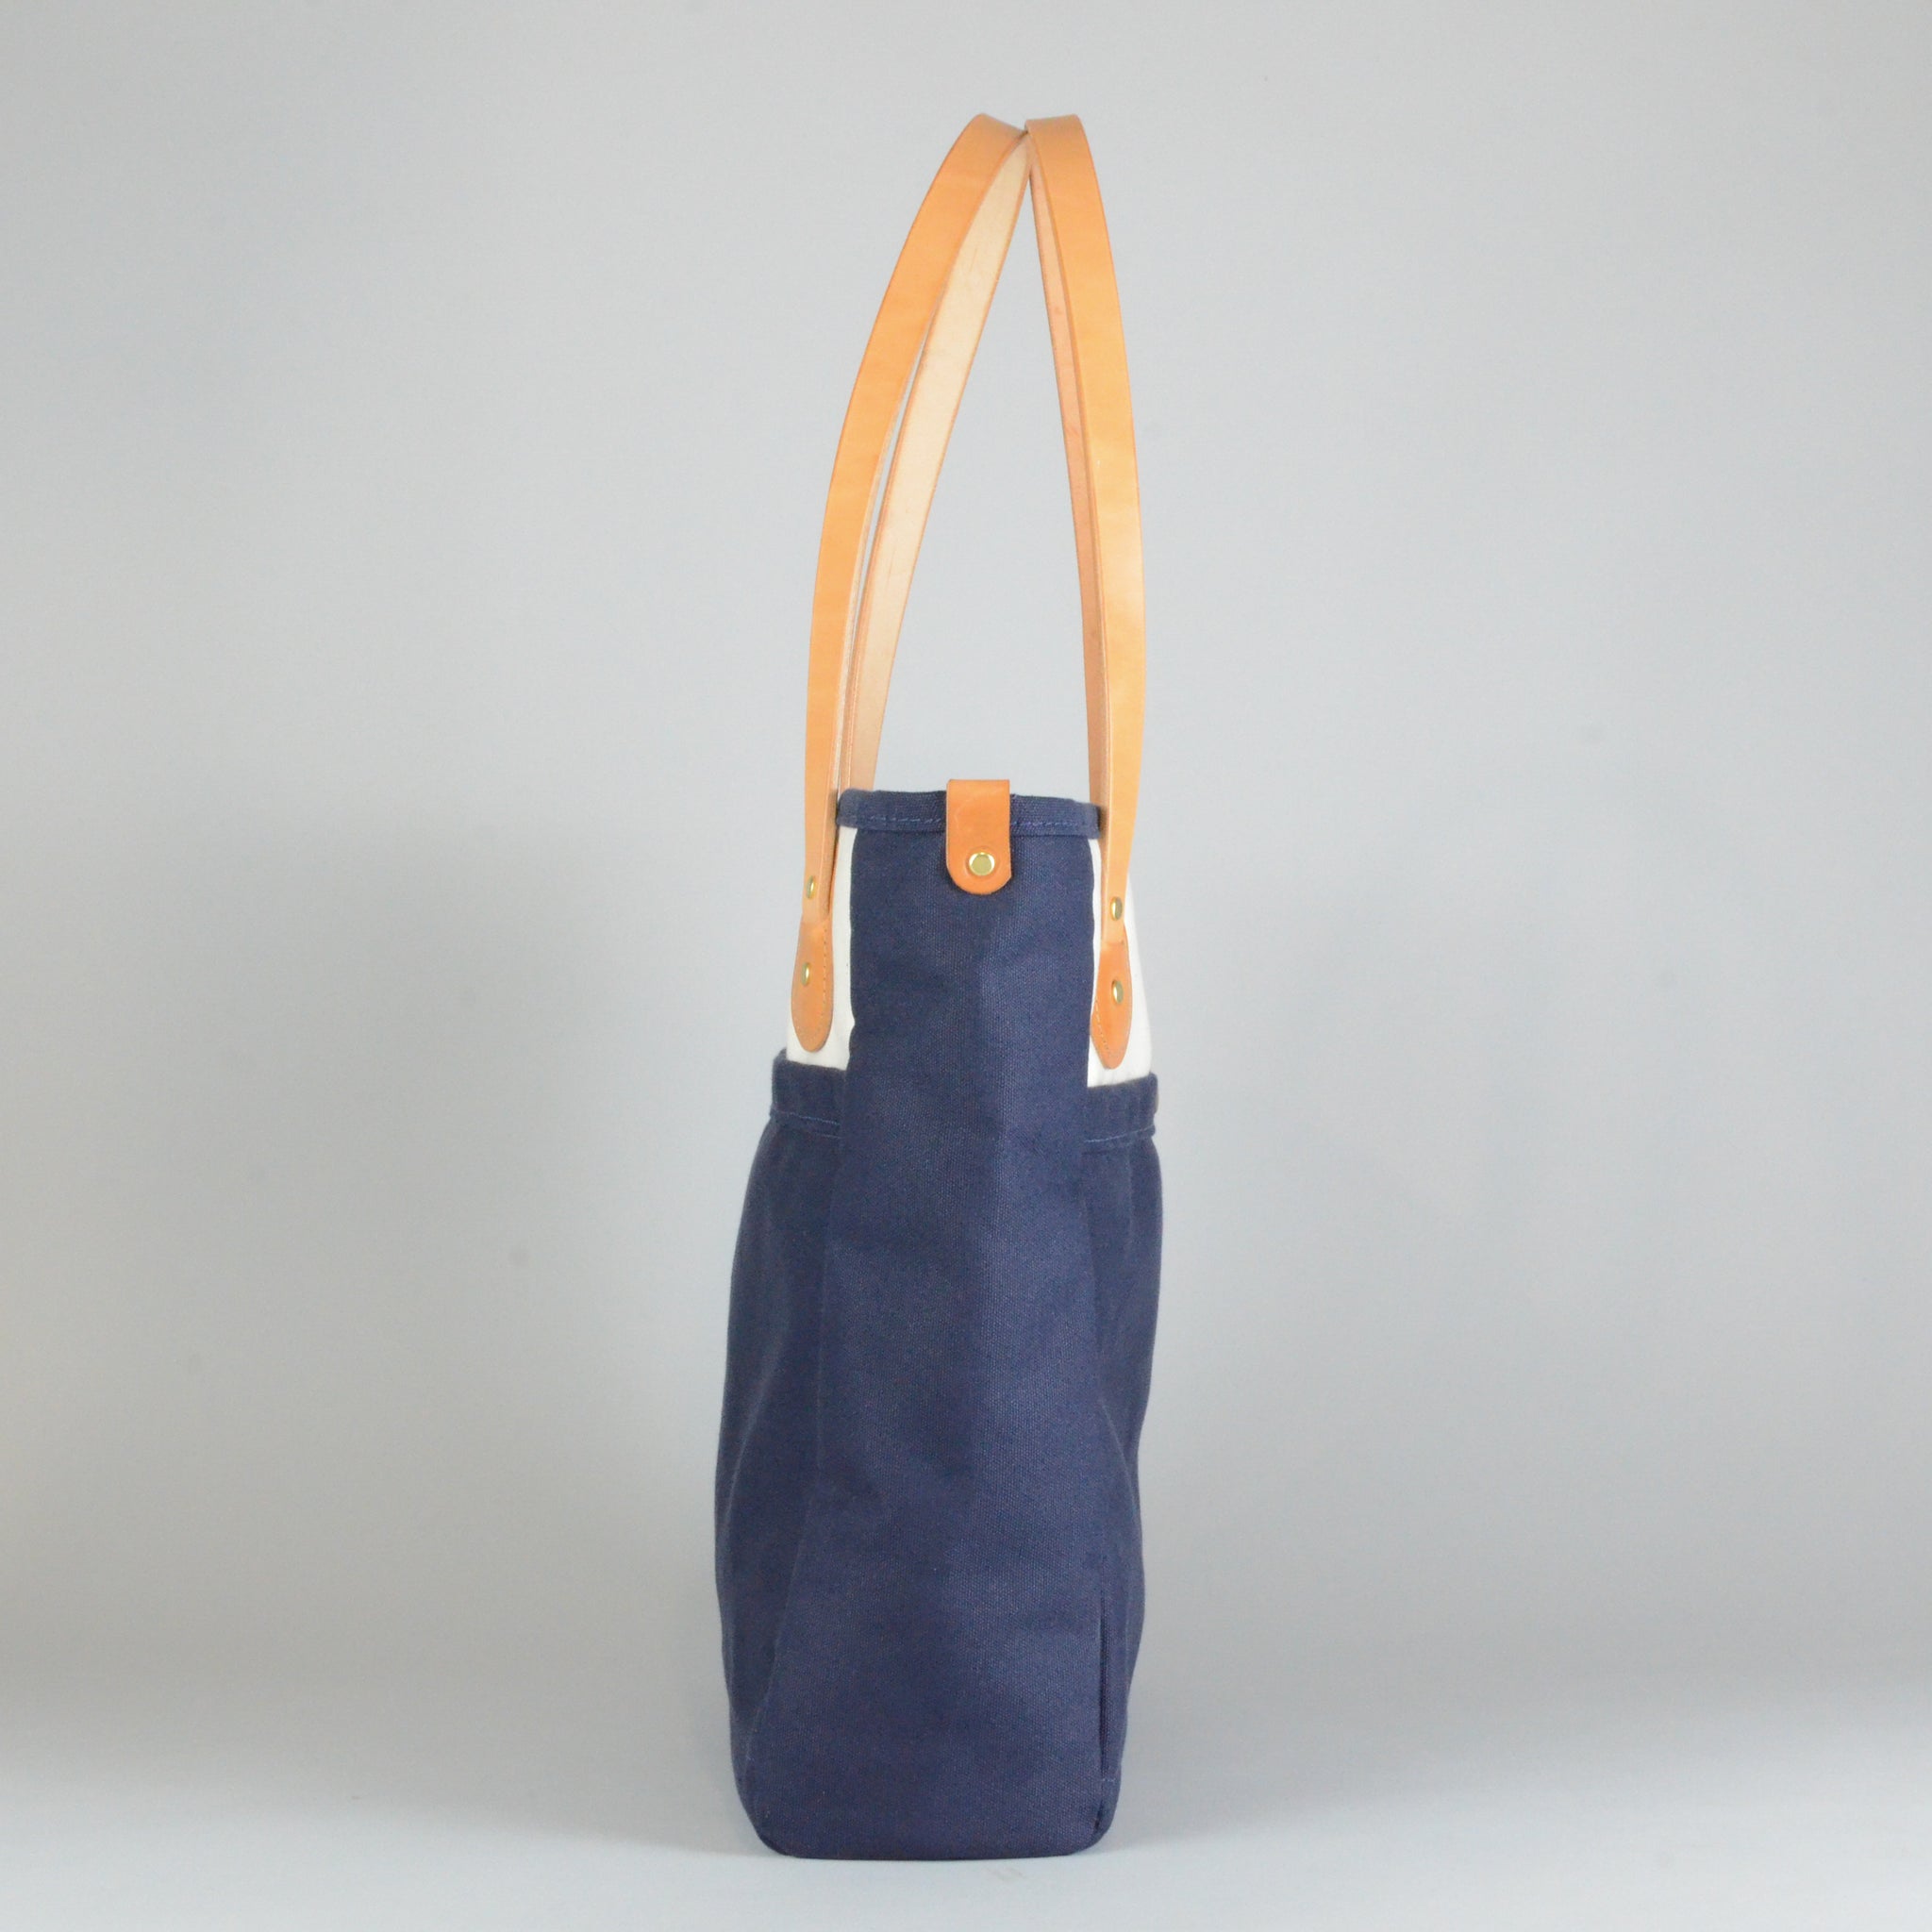 Filson Tote bag Navy, classic-looking shopper